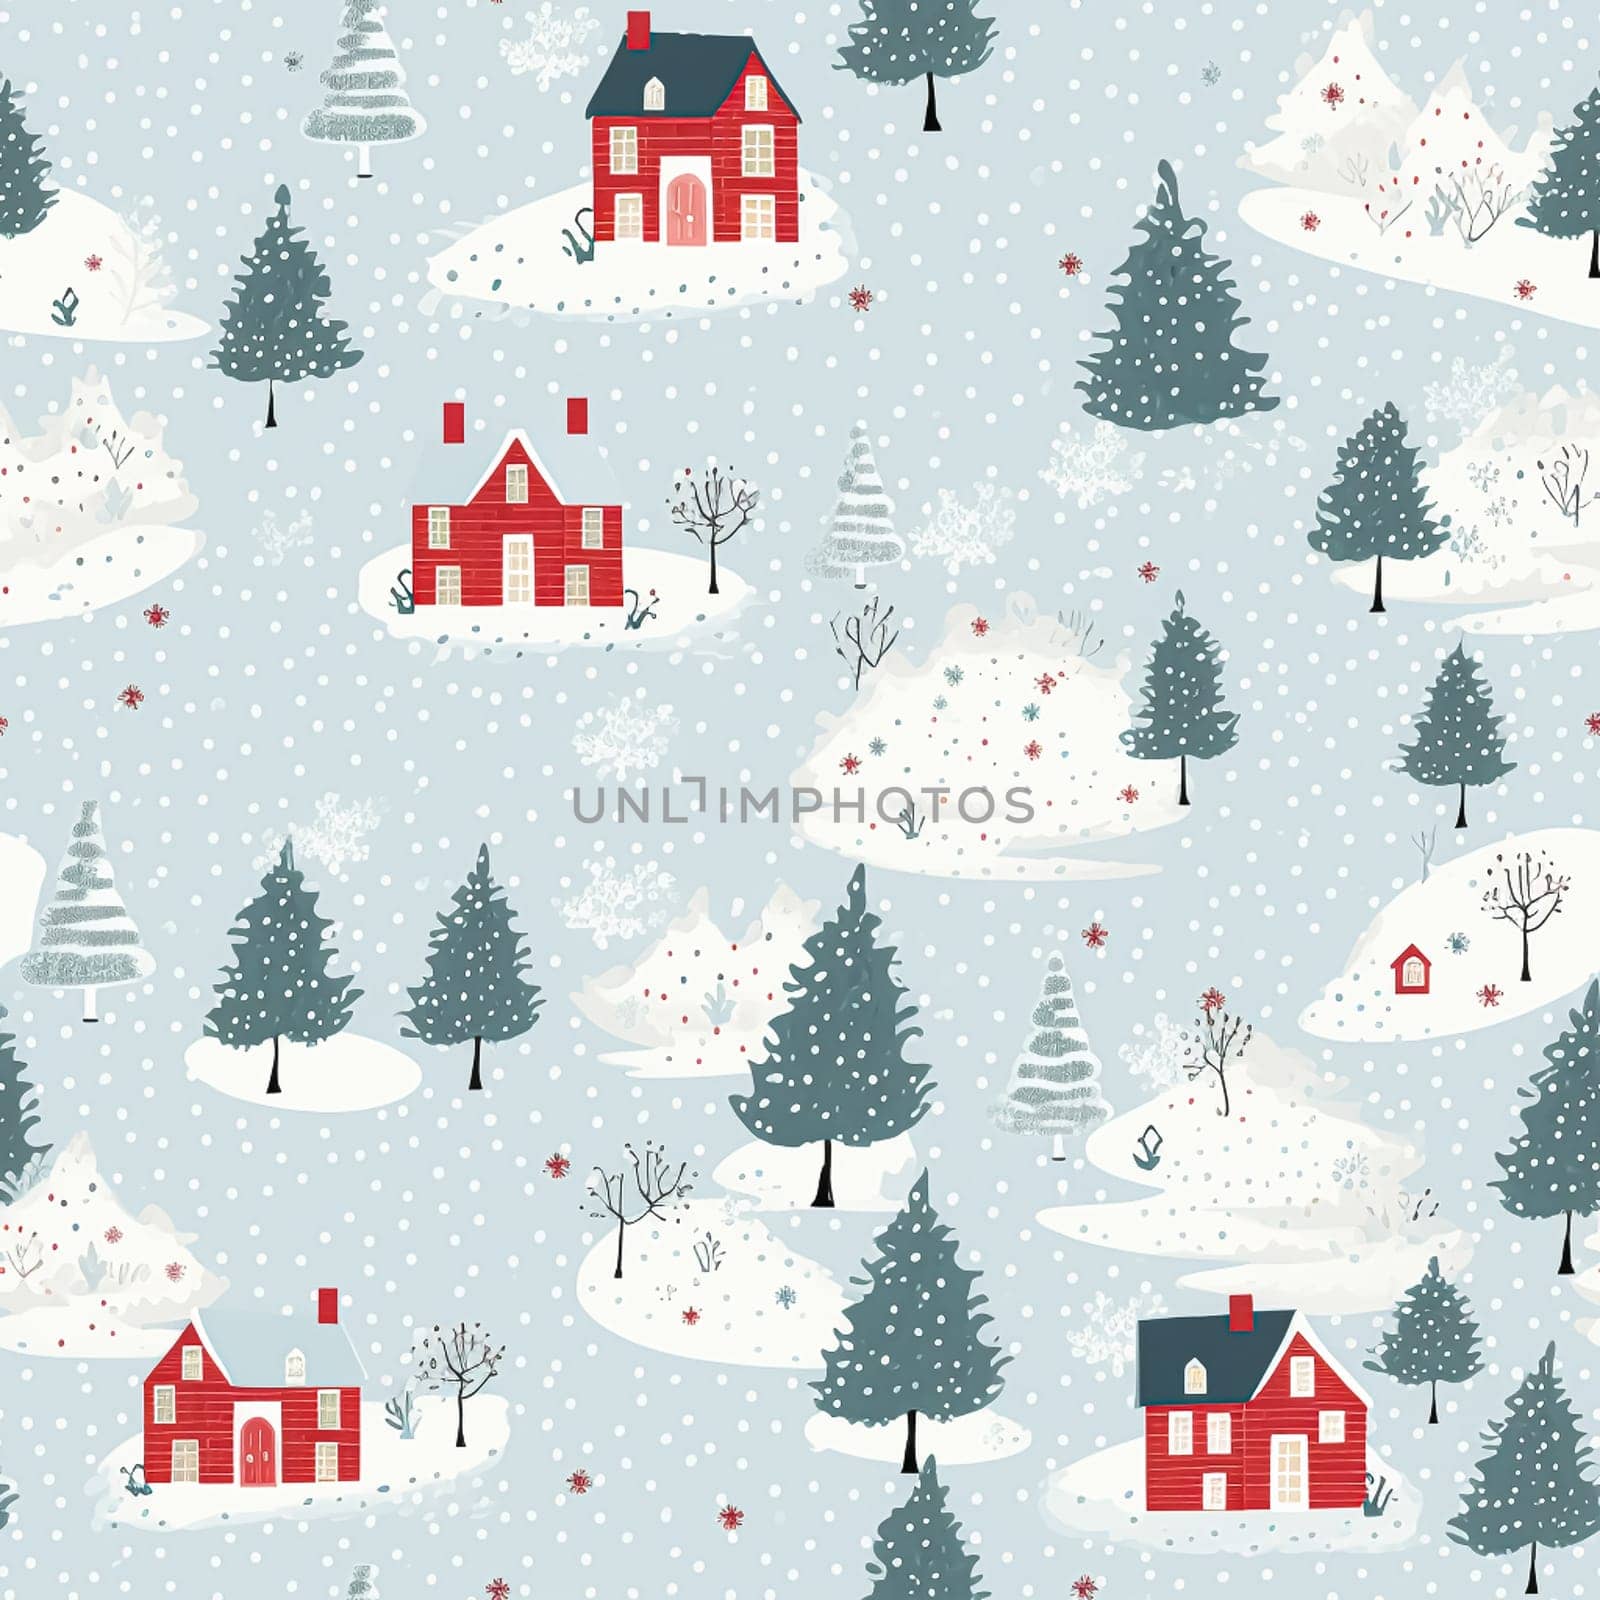 Seamless pattern, tileable winter country cottage print for wallpaper, Christmas wrapping paper, scrapbook, fabric and product design inspiration